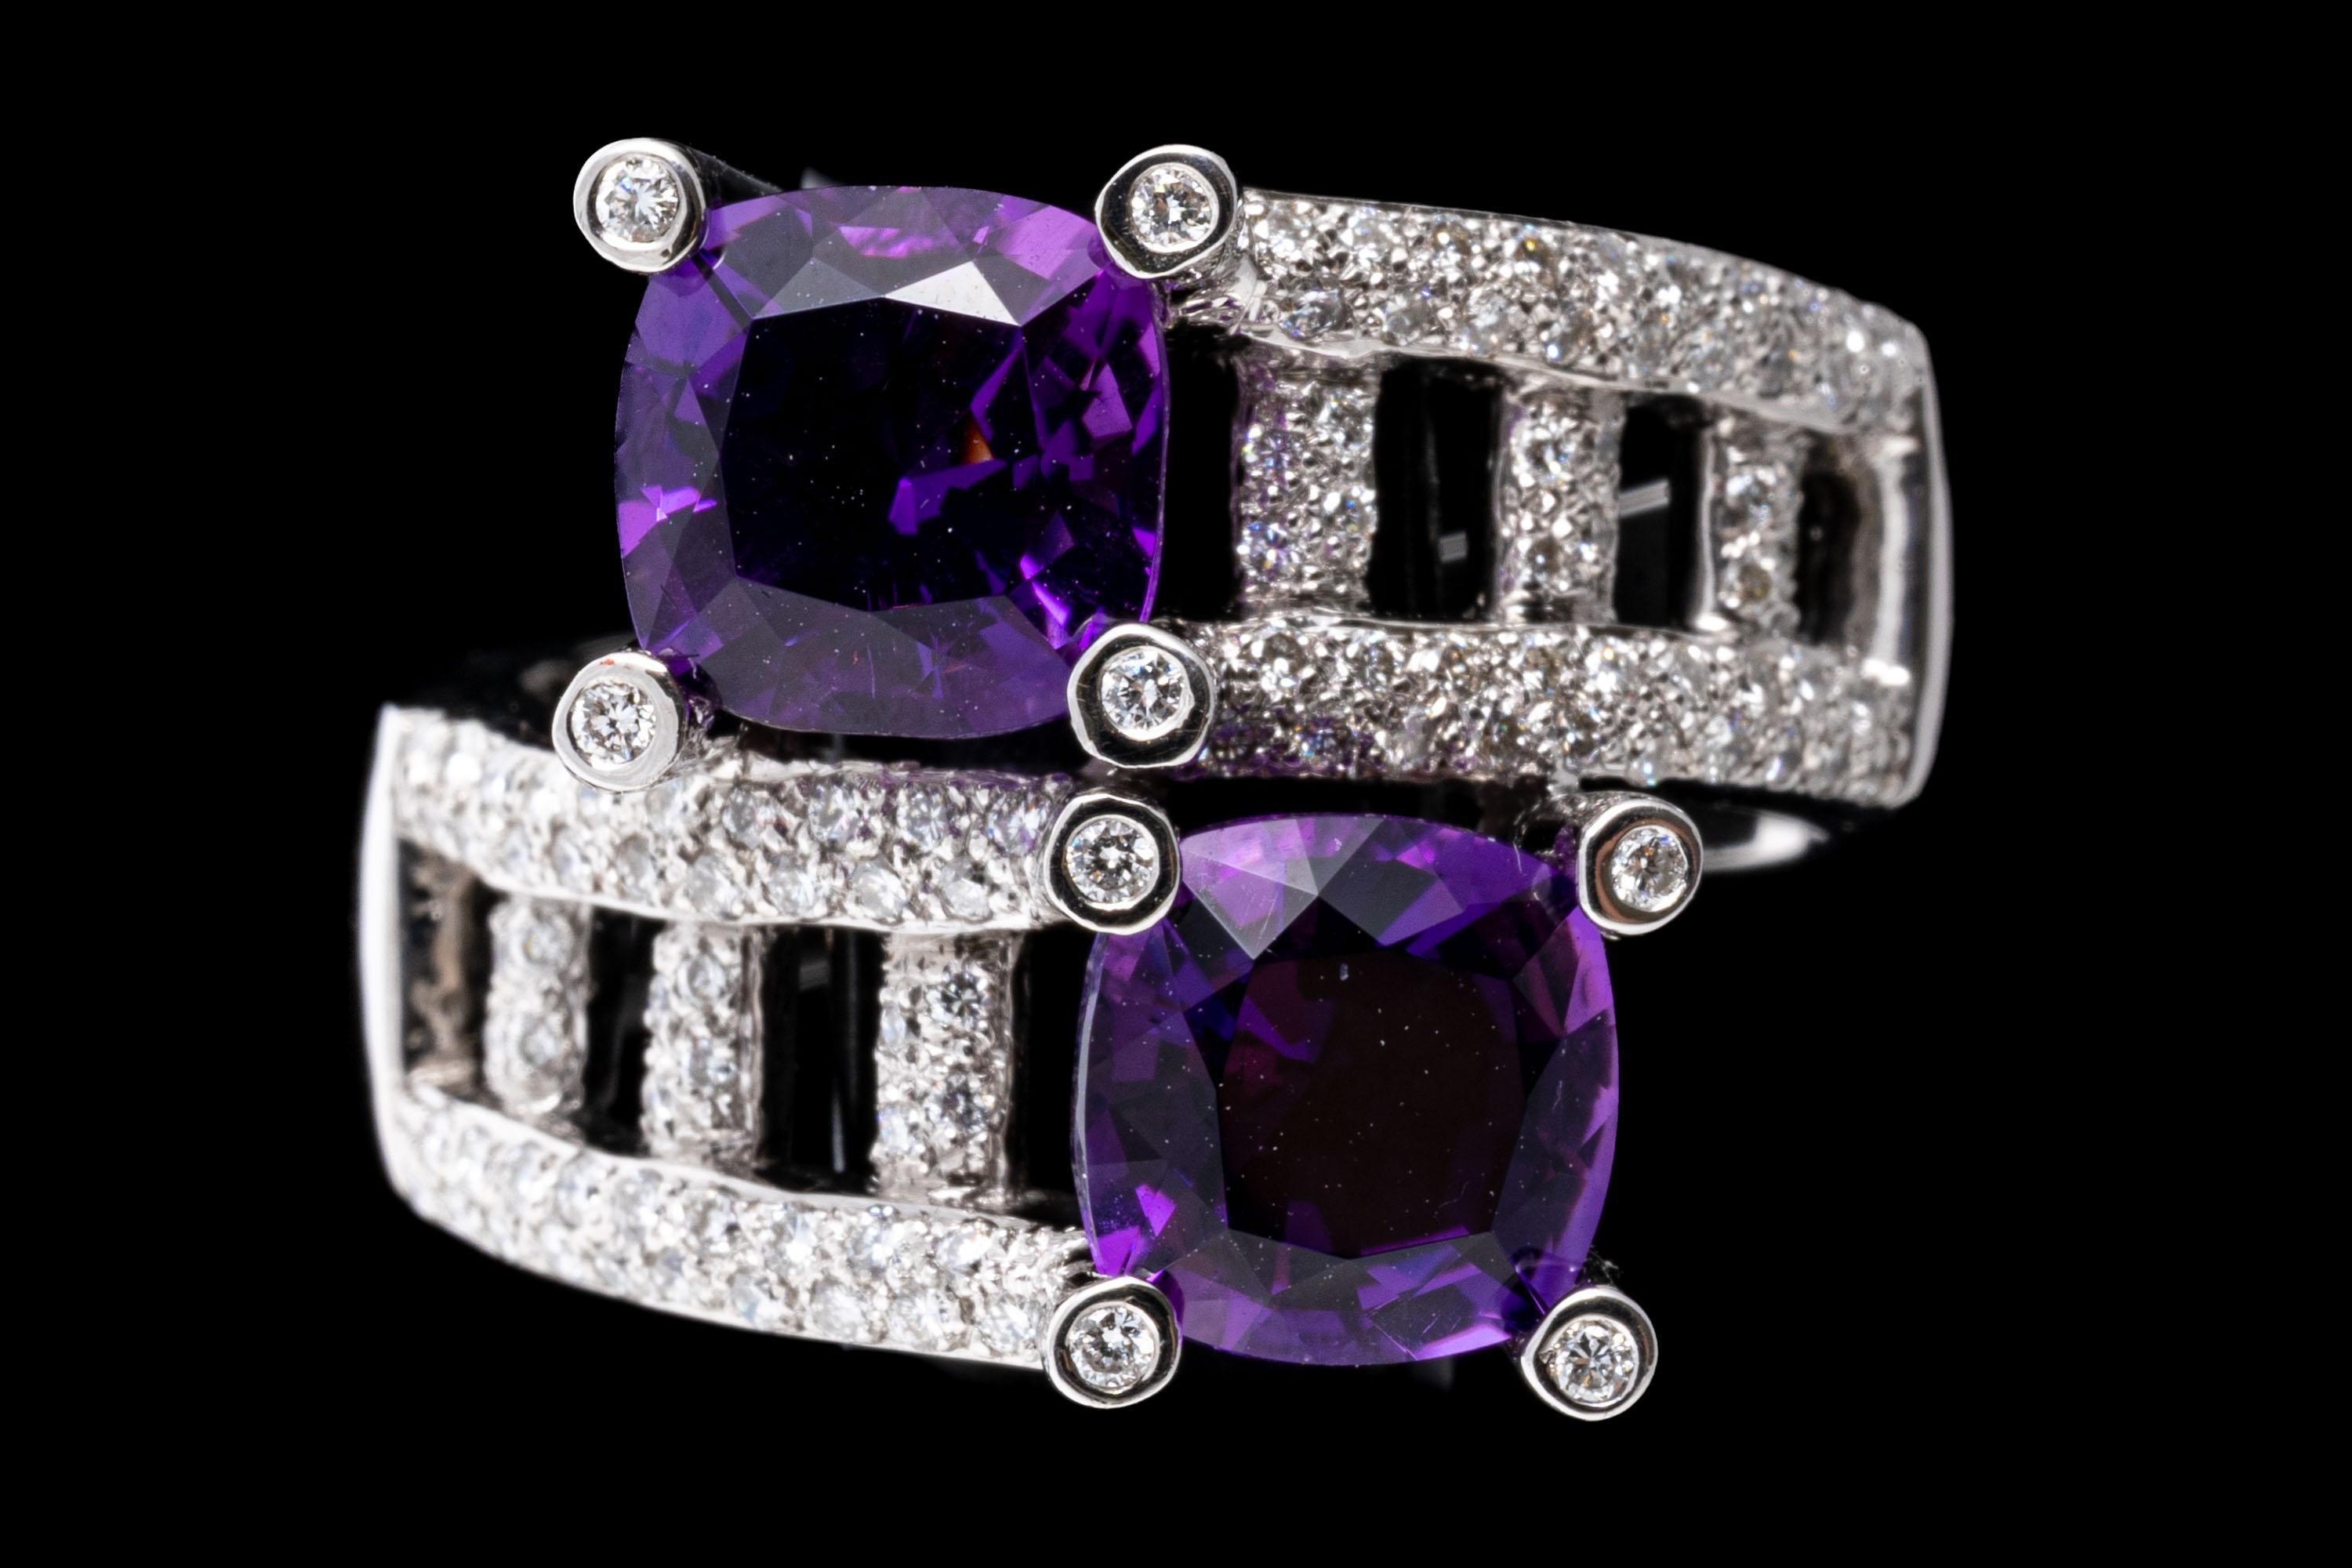 14k white gold ring. This striking bypass style ring is set with two square cushion faceted, dark purple color amethysts, approximately 2.32 TCW, prong set, and decorated with offset, thick ladder style crossover shoulders, pave set with round